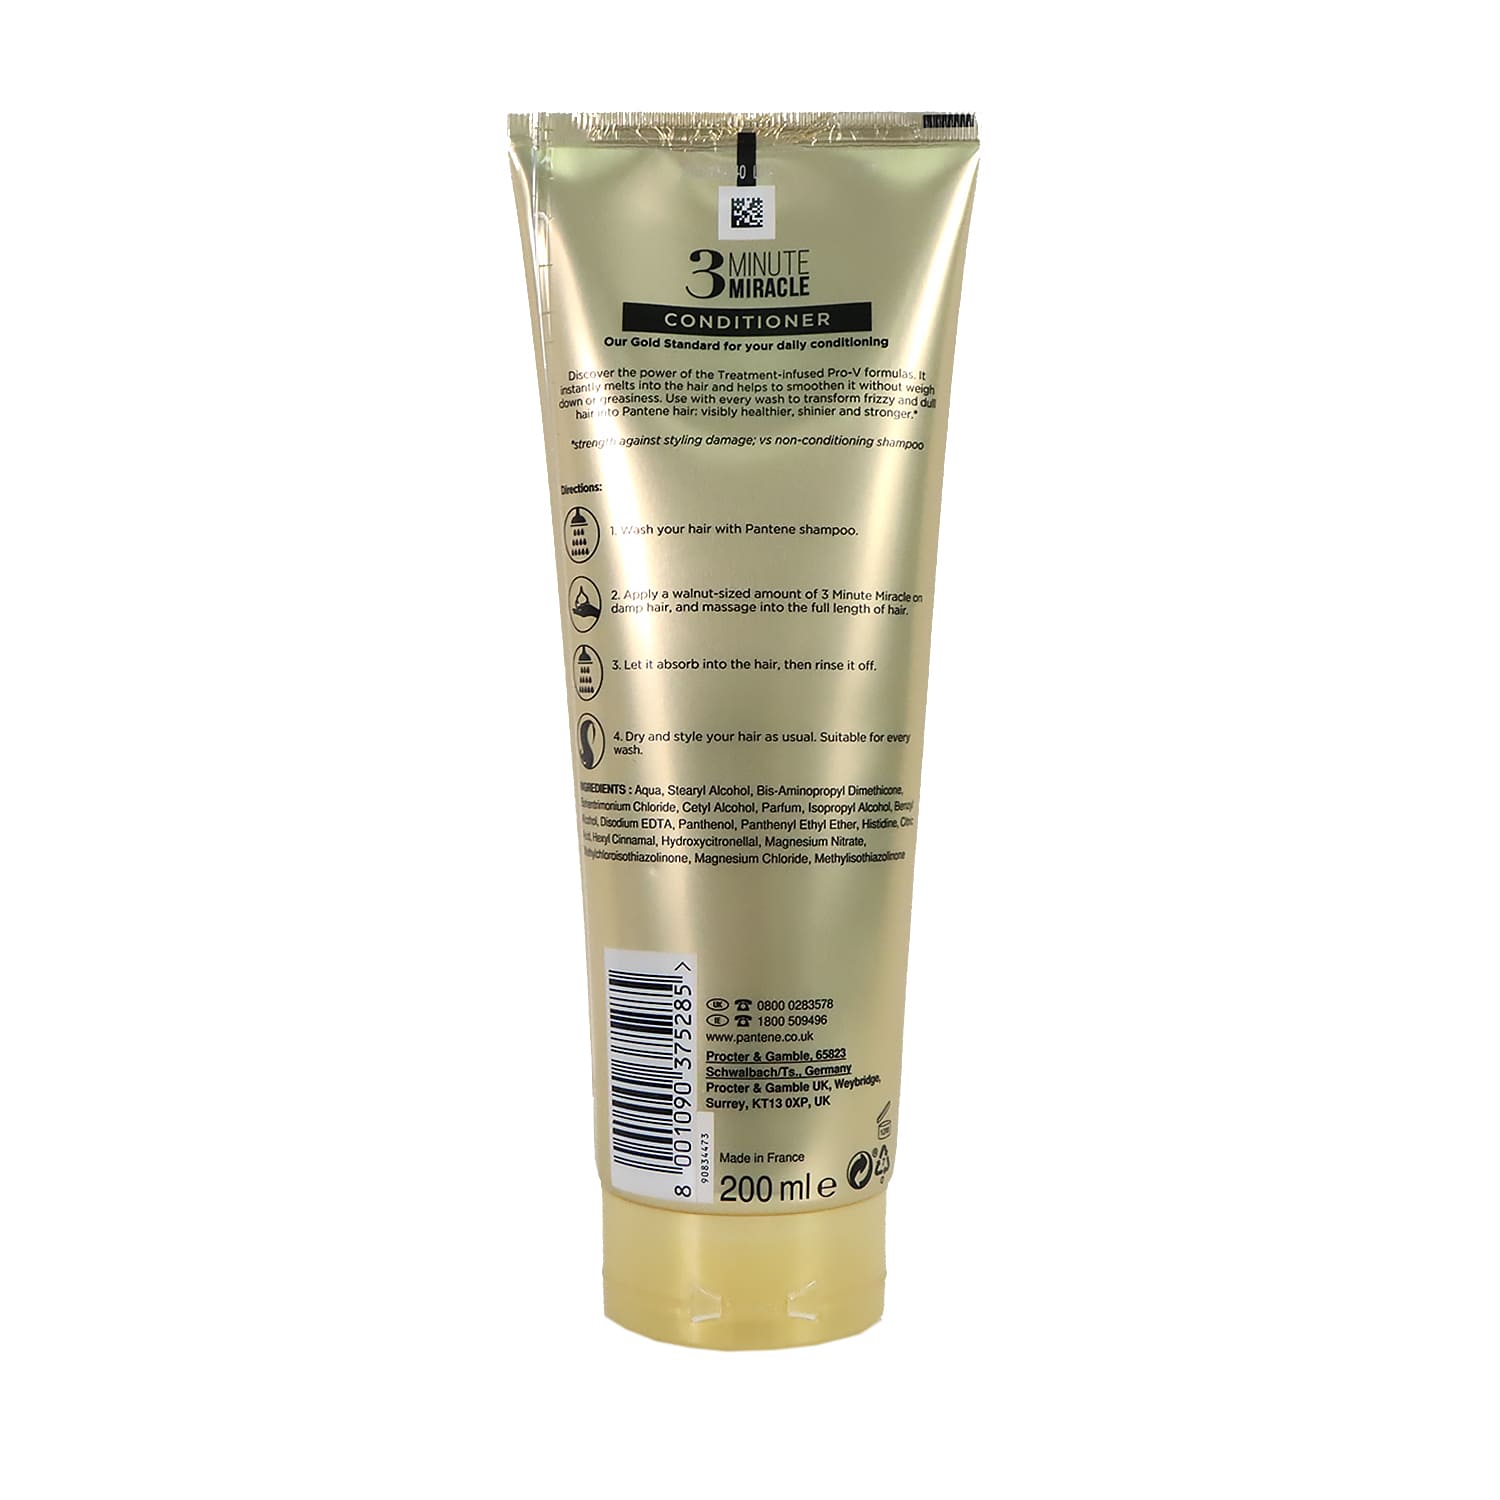 Pantene Pro-V Smooth & Sleek 3 Minute Miracle Conditioner 200ml